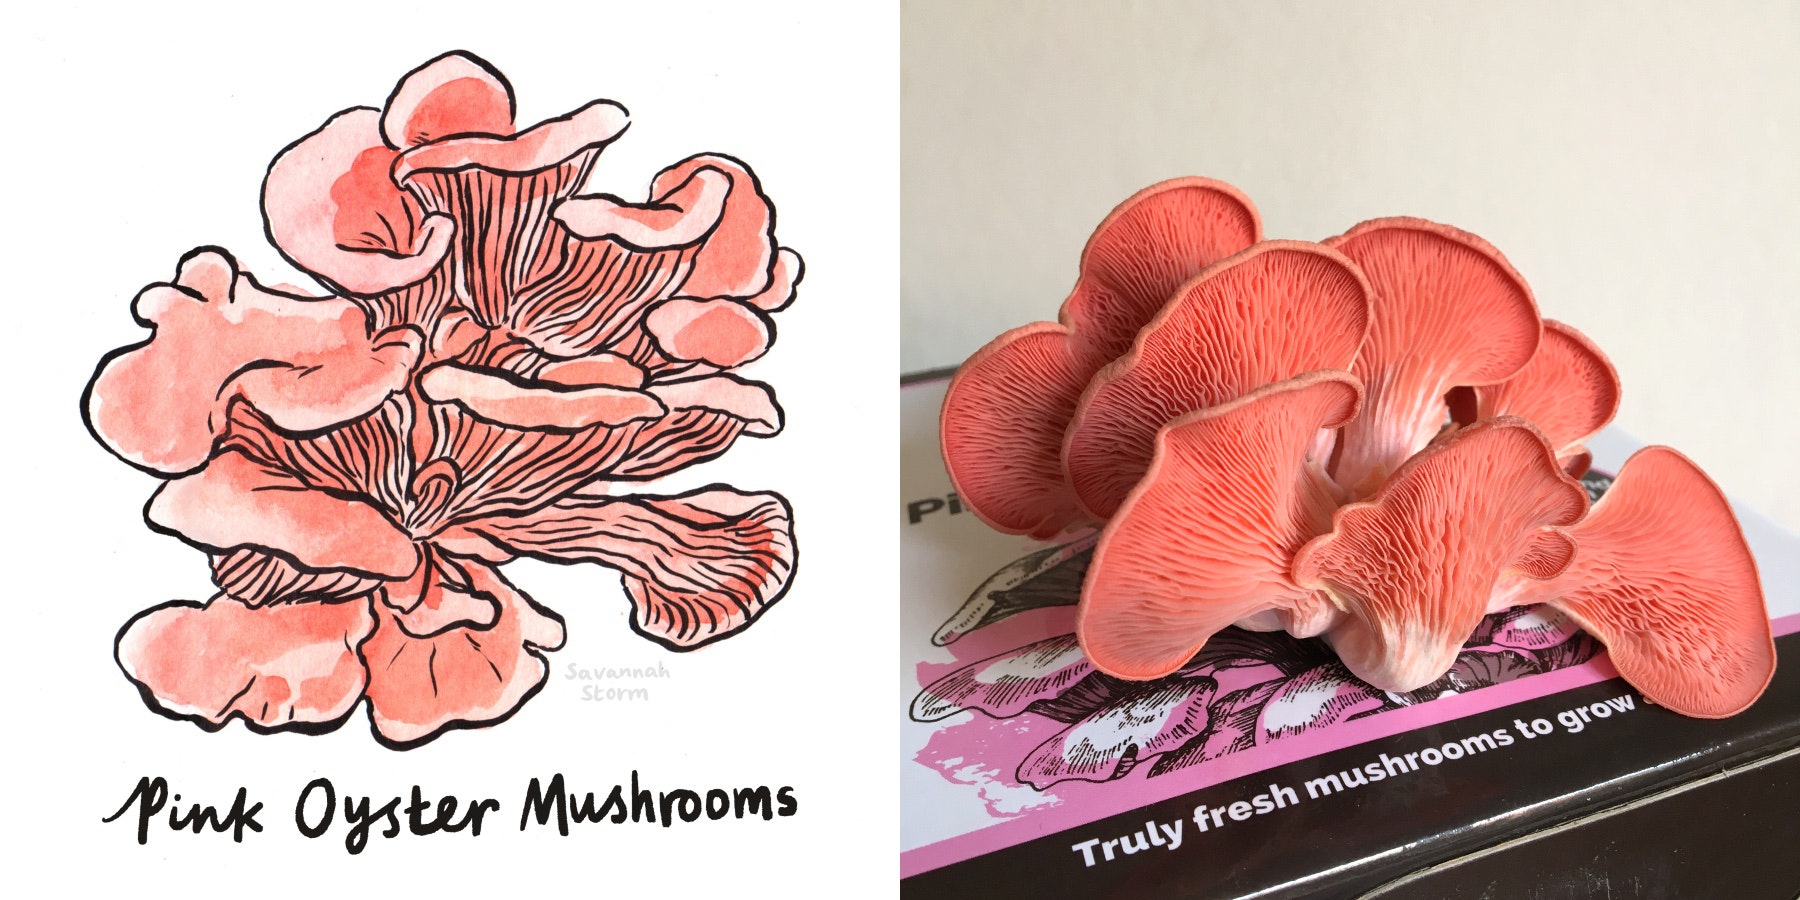 Hand painted illustration of a pink oyster mushroom, with handwritten typography labelling the specimen.